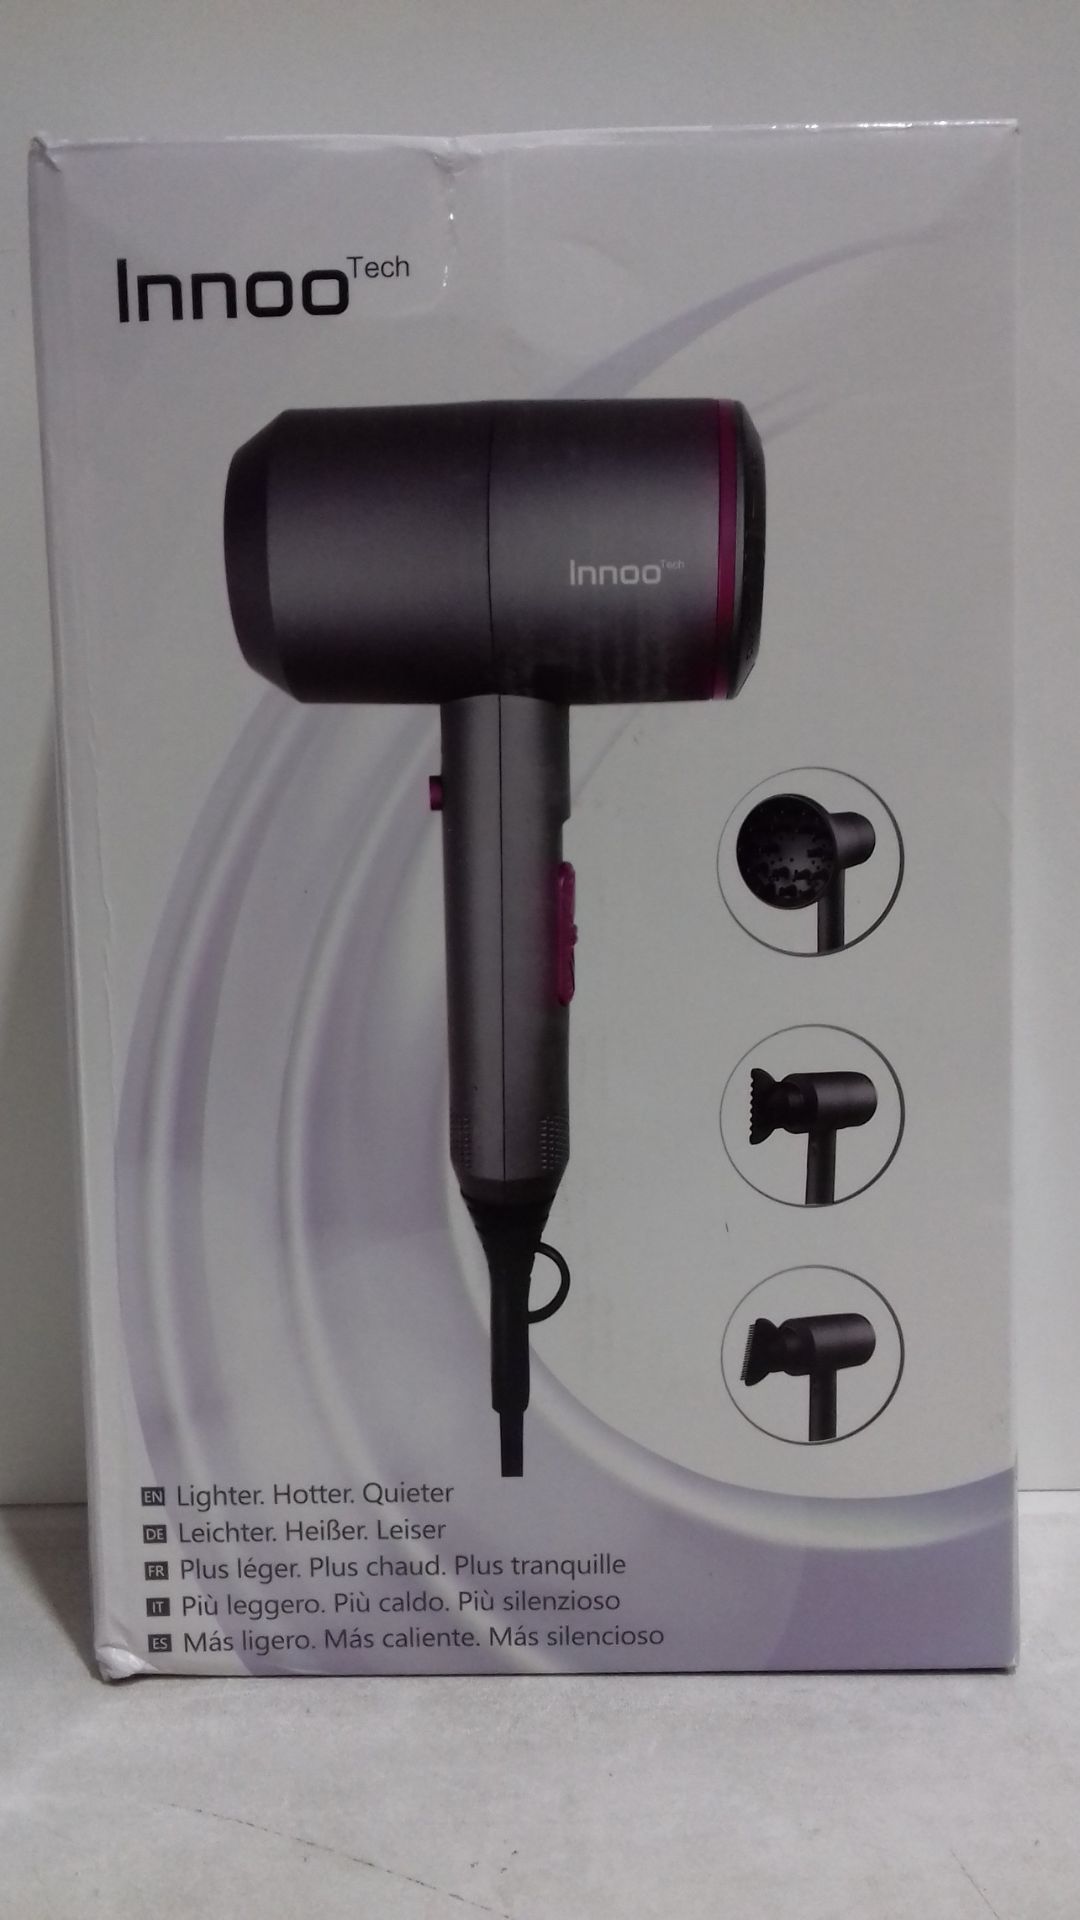 RRP £28.04 HappyGoo Professional Hair Dryer 2000W Powerful AC - Image 2 of 2